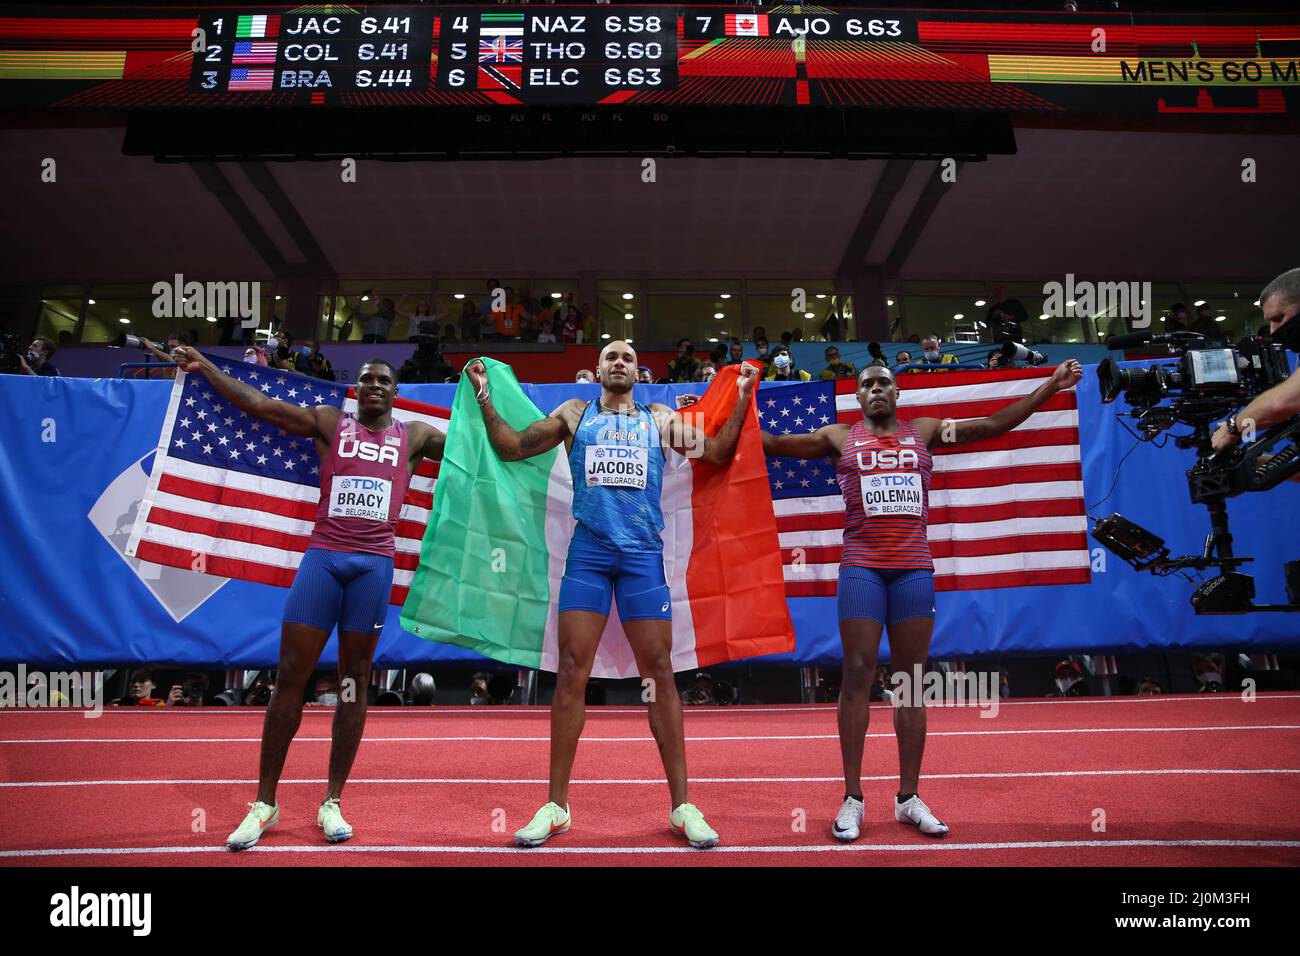 Belgrade, Serbia. 19th Mar, 2022. Gold medalist Lamont Marcell Jacobs (C) of Italy, silver medalist Christian Coleman (R) of the United States and bronze medalist Marvin Bracy of the United States, pose after the men's 60m final at the World Athletics Indoor Championships Belgrade 2022 in Stark Arena, Belgrade, Serbia, March 19, 2022. Credit: Zheng Huansong/Xinhua/Alamy Live News Stock Photo